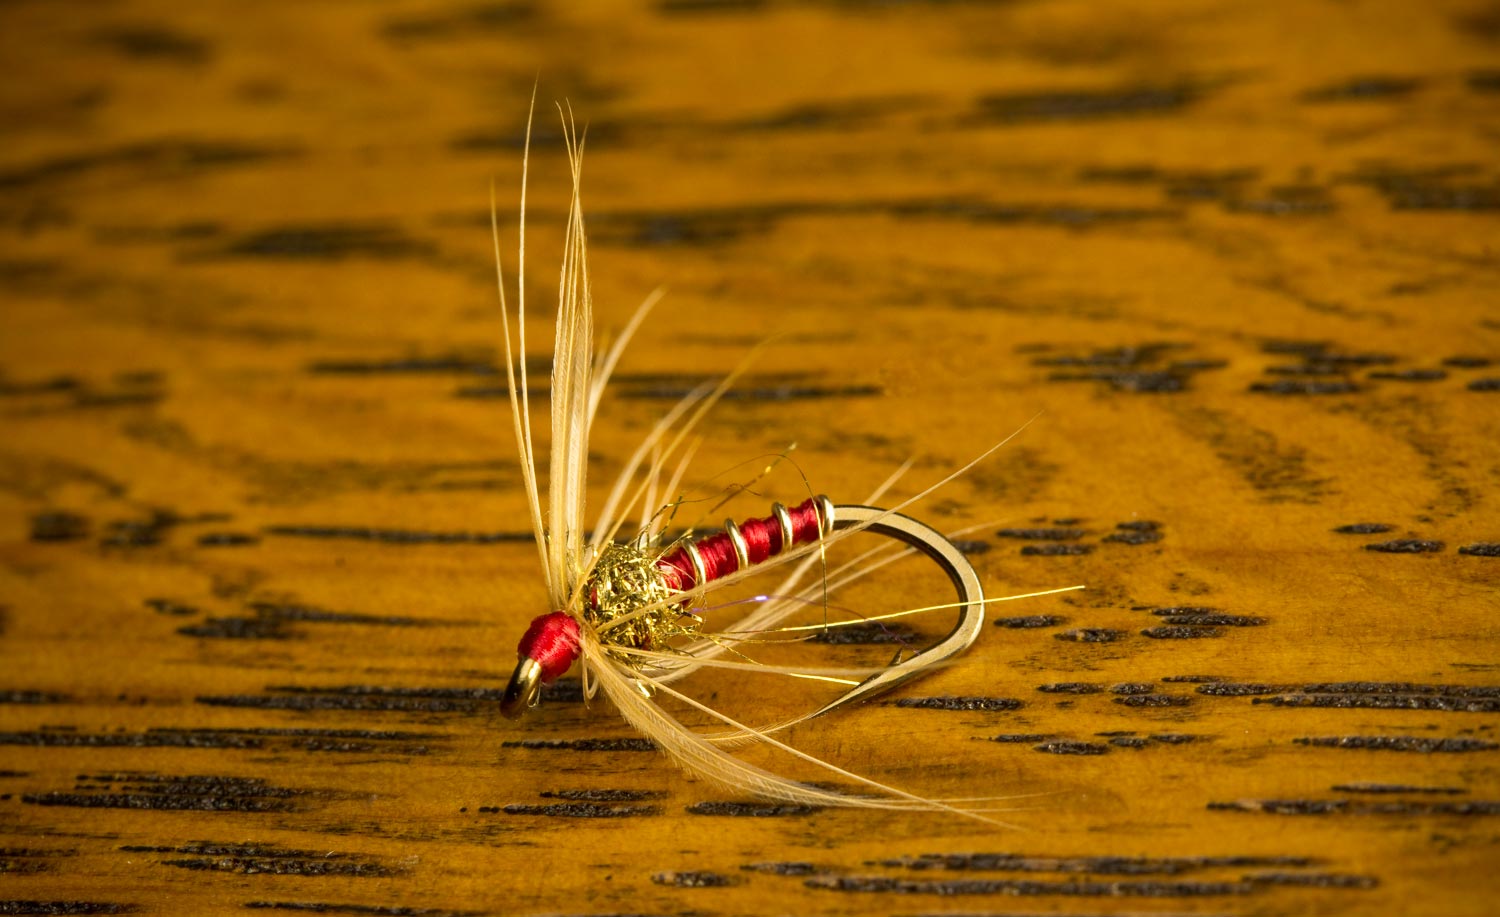 Magic // Steelhead Spey Fly by Solitude — Red's Fly Shop